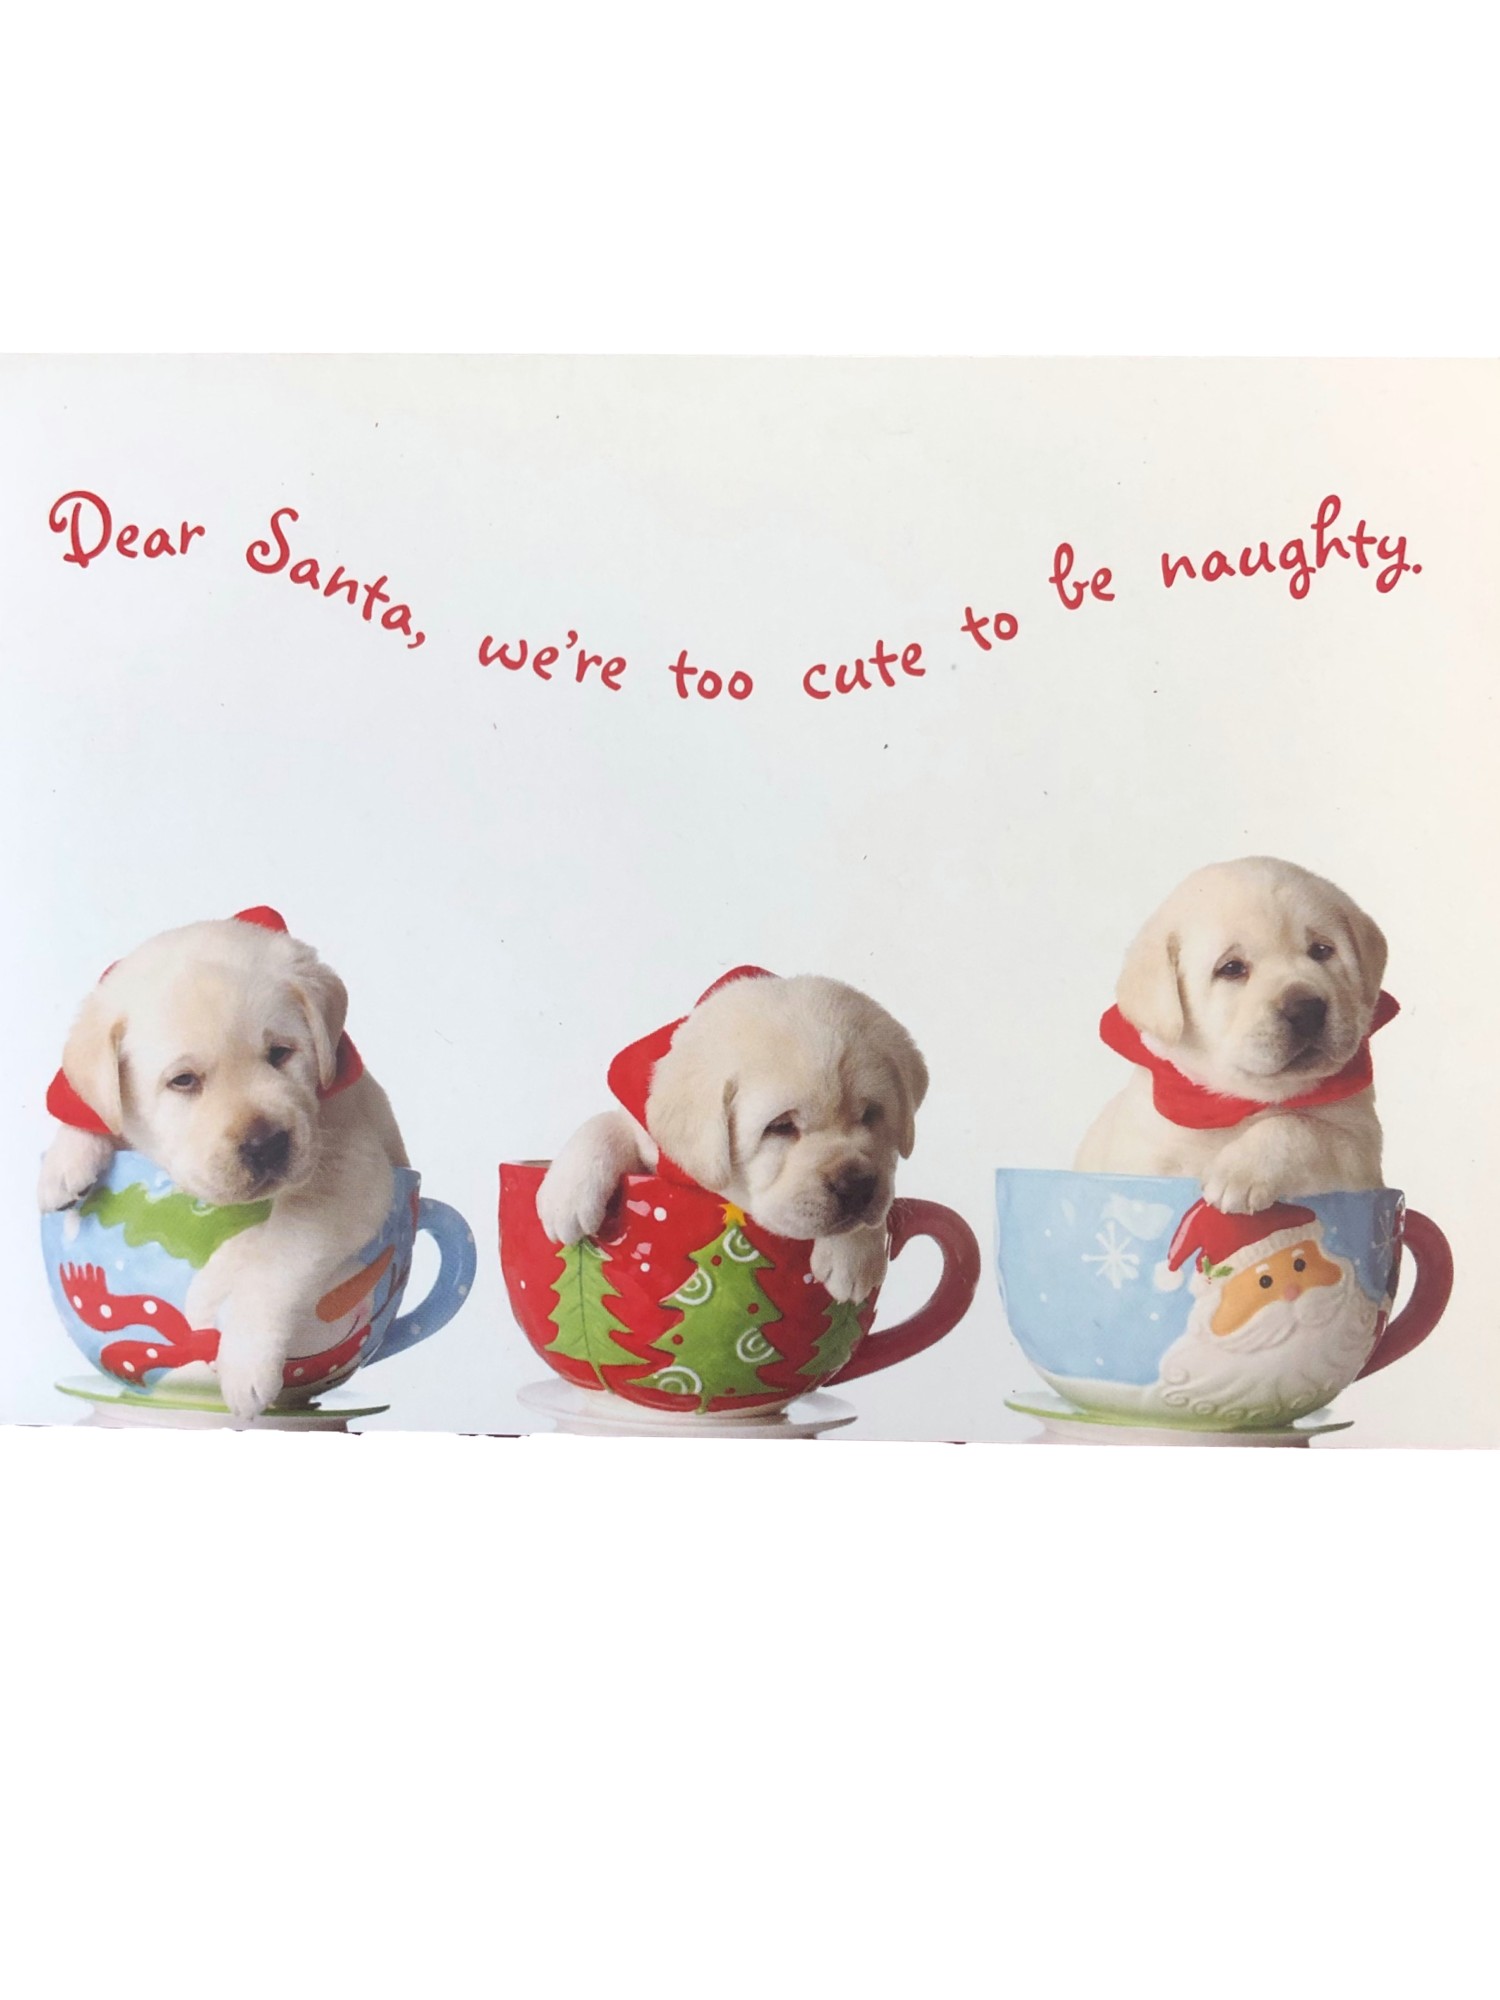 Trimmerry 16 Too Cute To Be Naughty Puppy Dog Holiday Christmas Cards